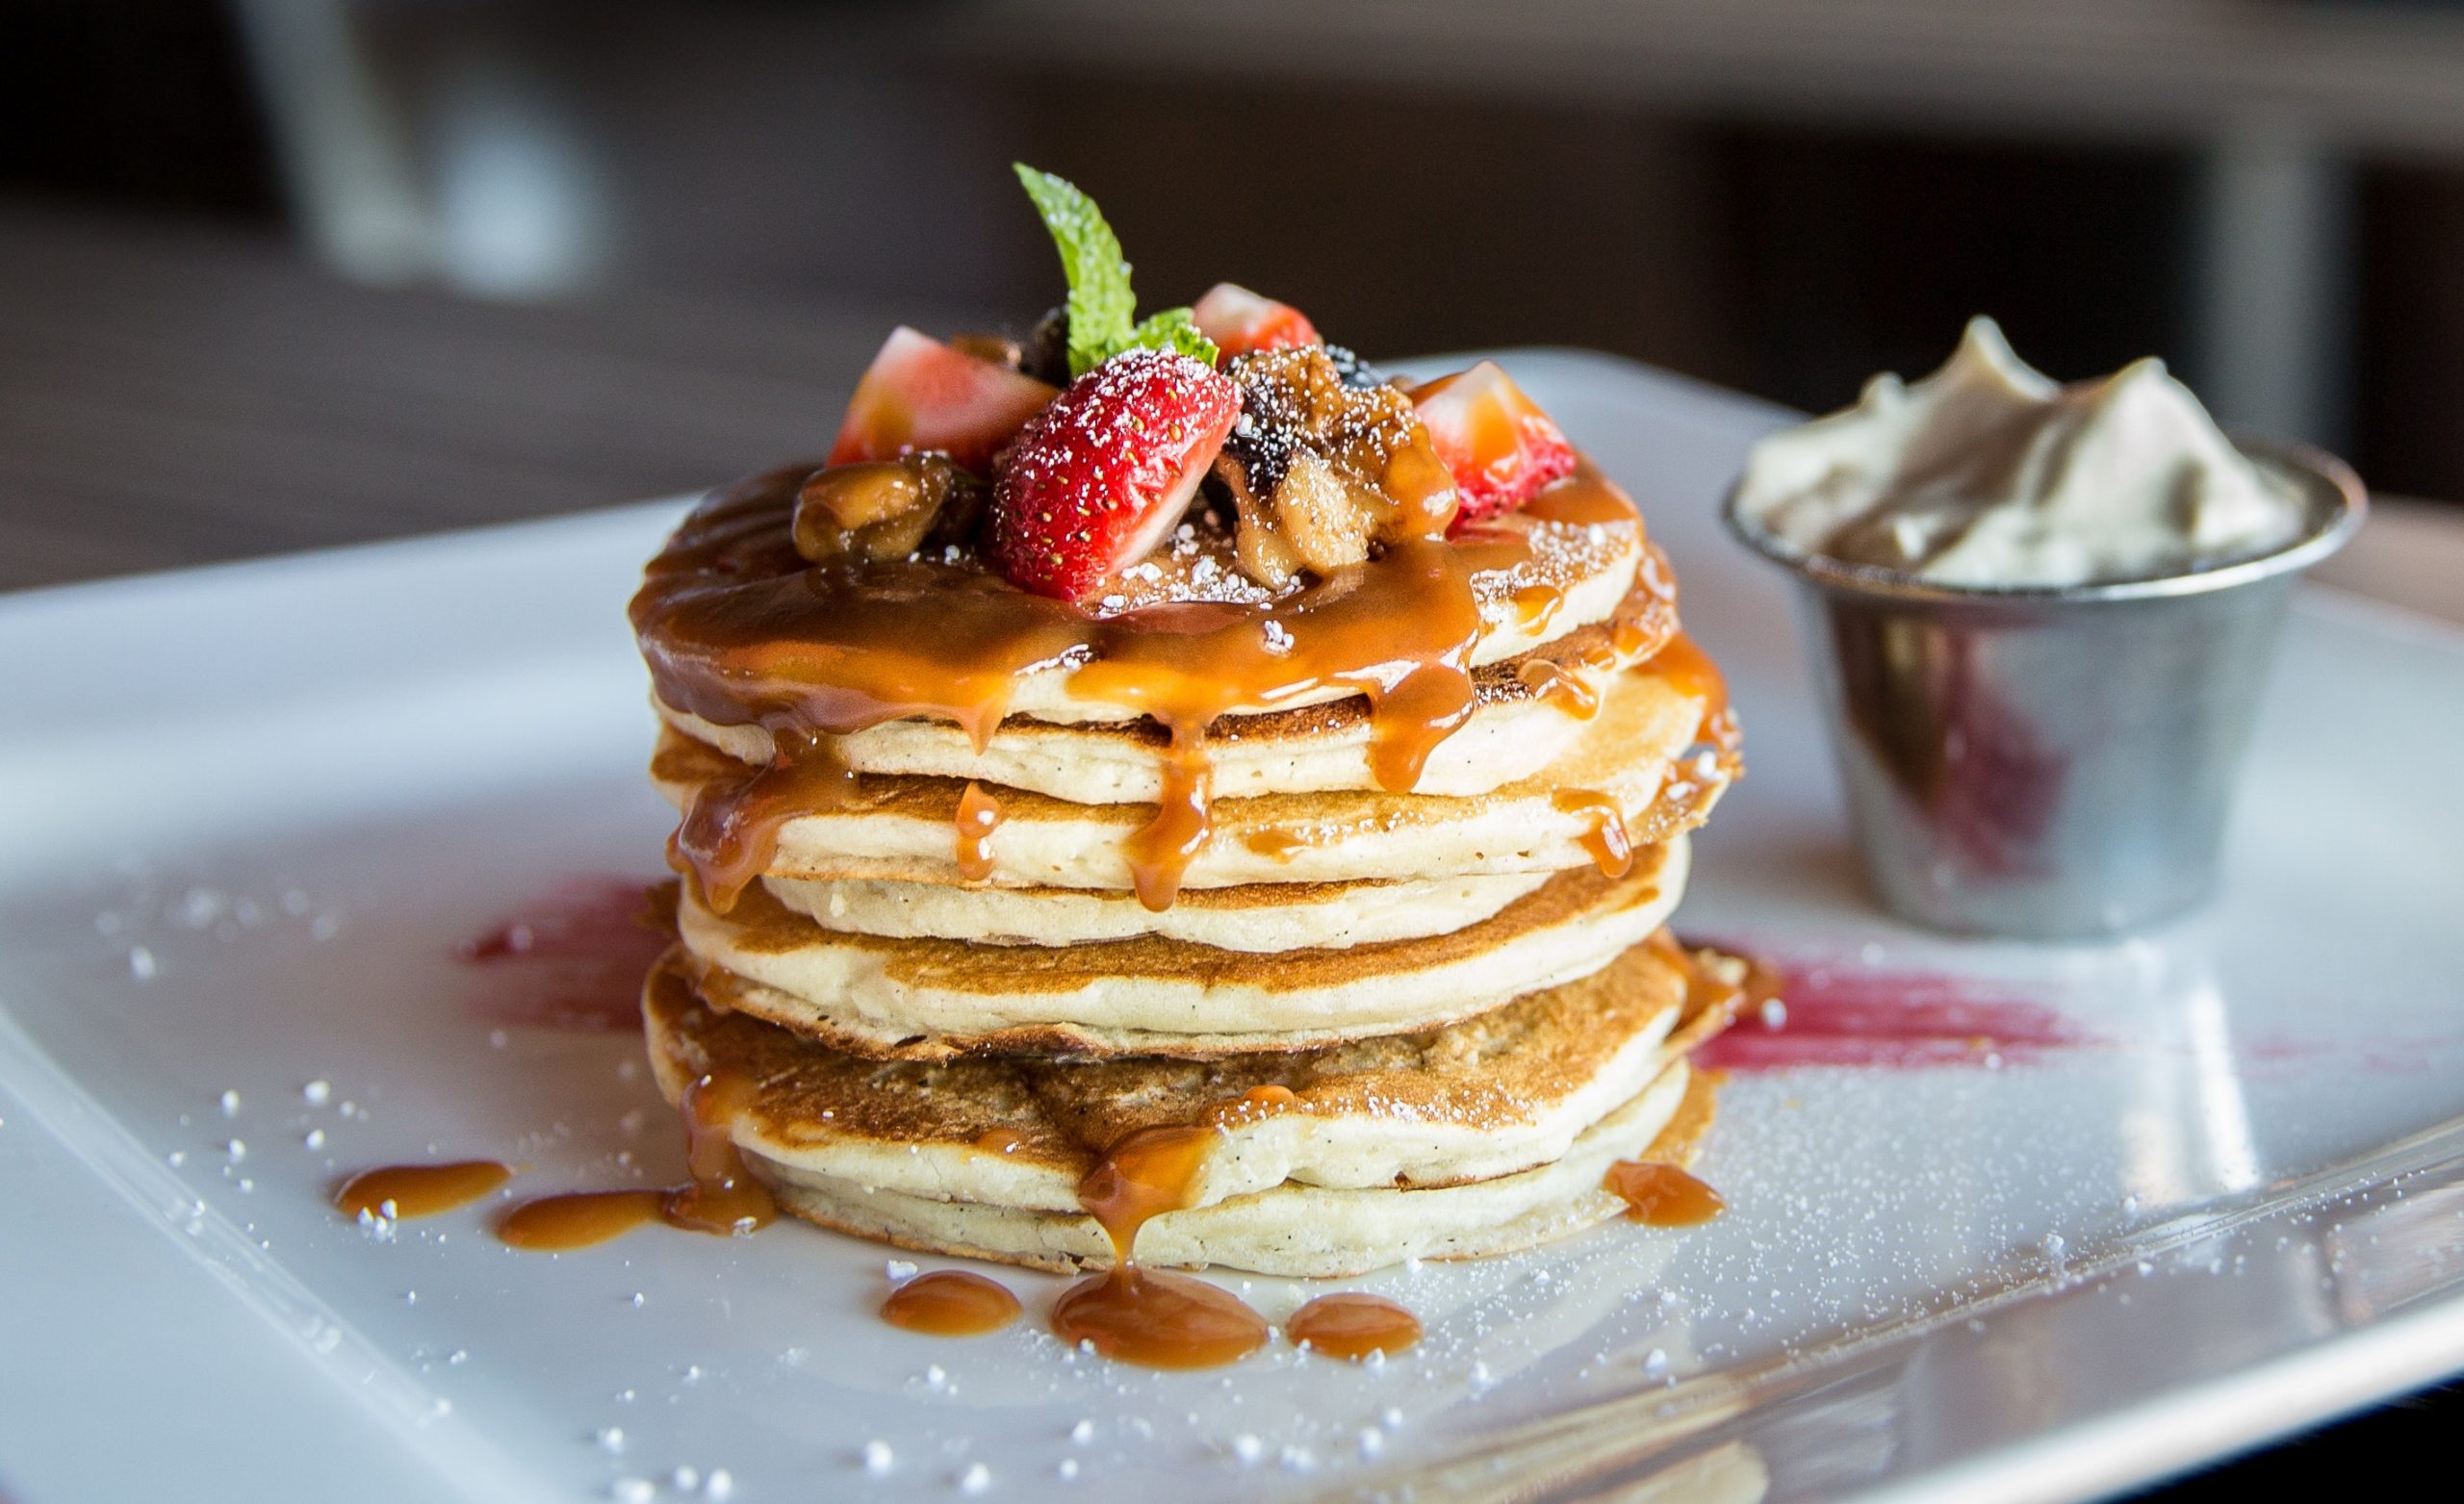 A stack of pancakes topped with berries and syrup.